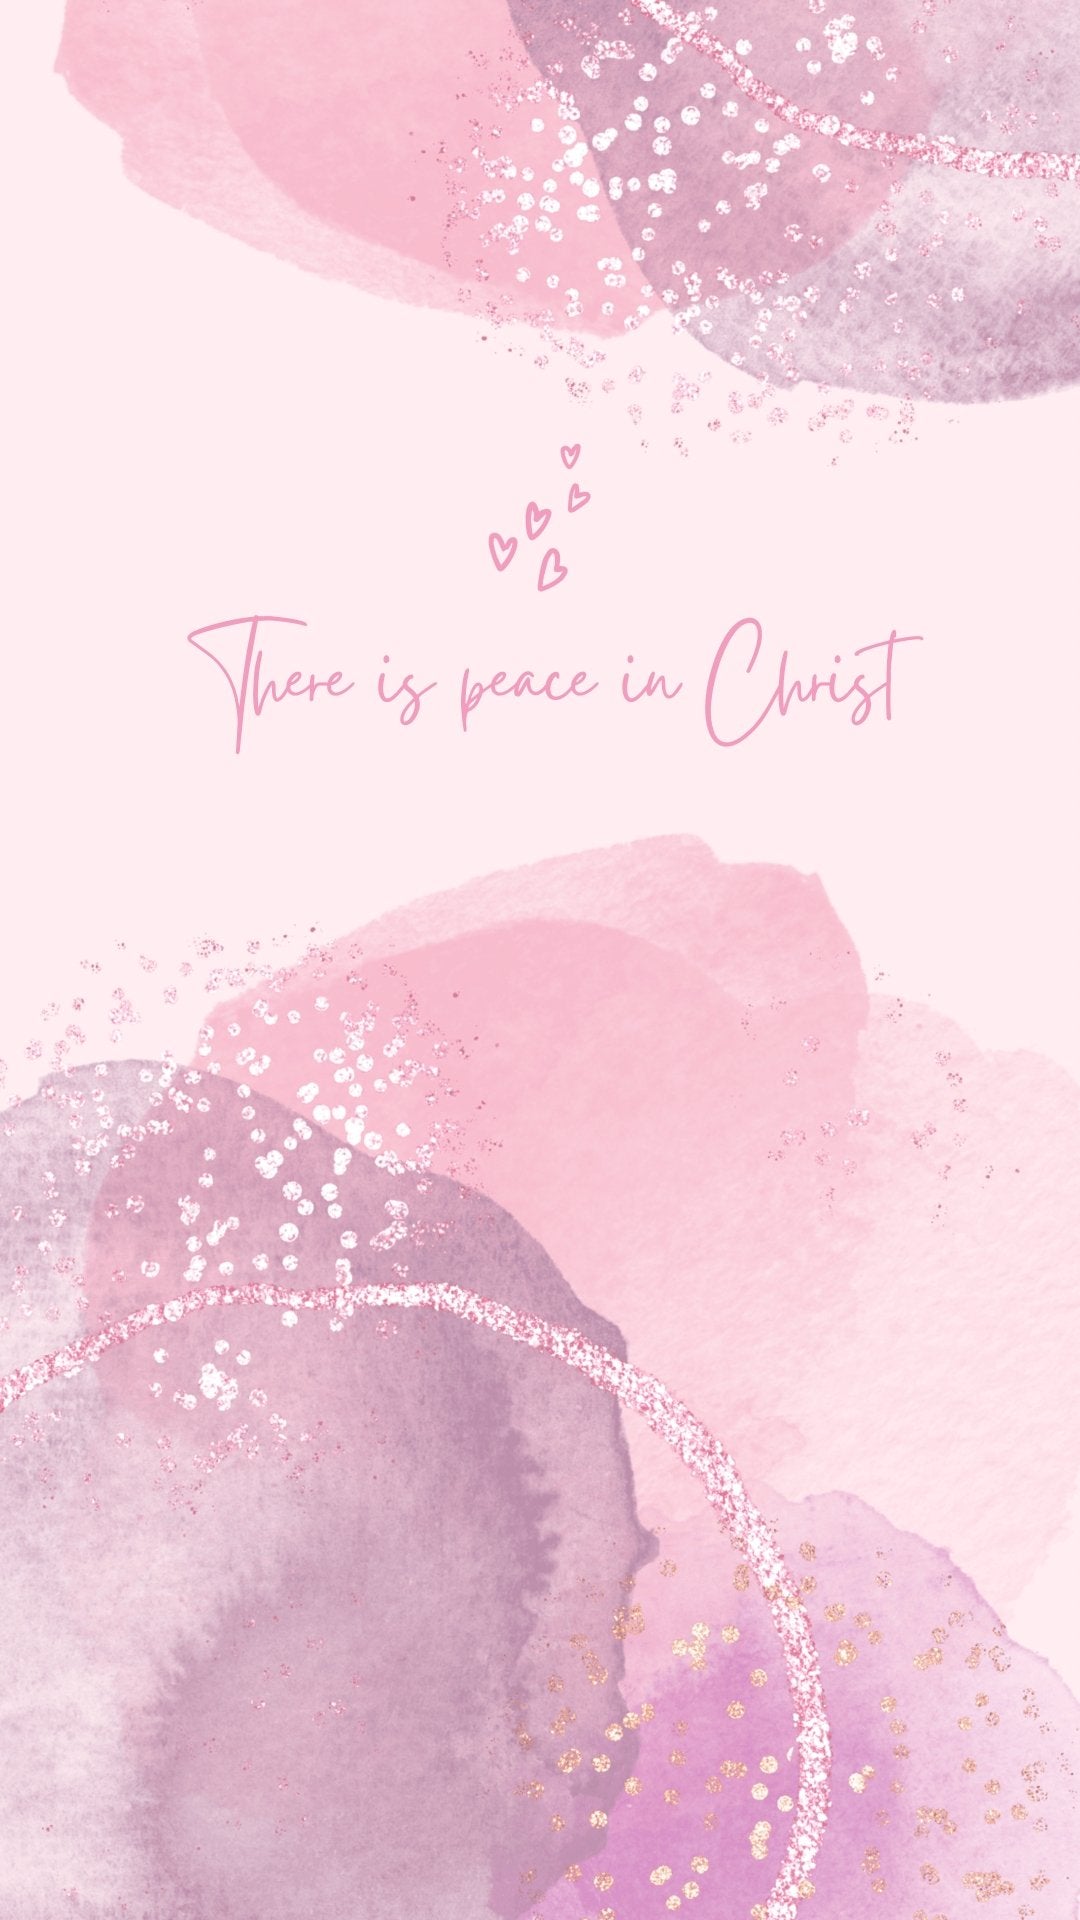 Peace In Christ Phone Wallpapers - Bee The Light